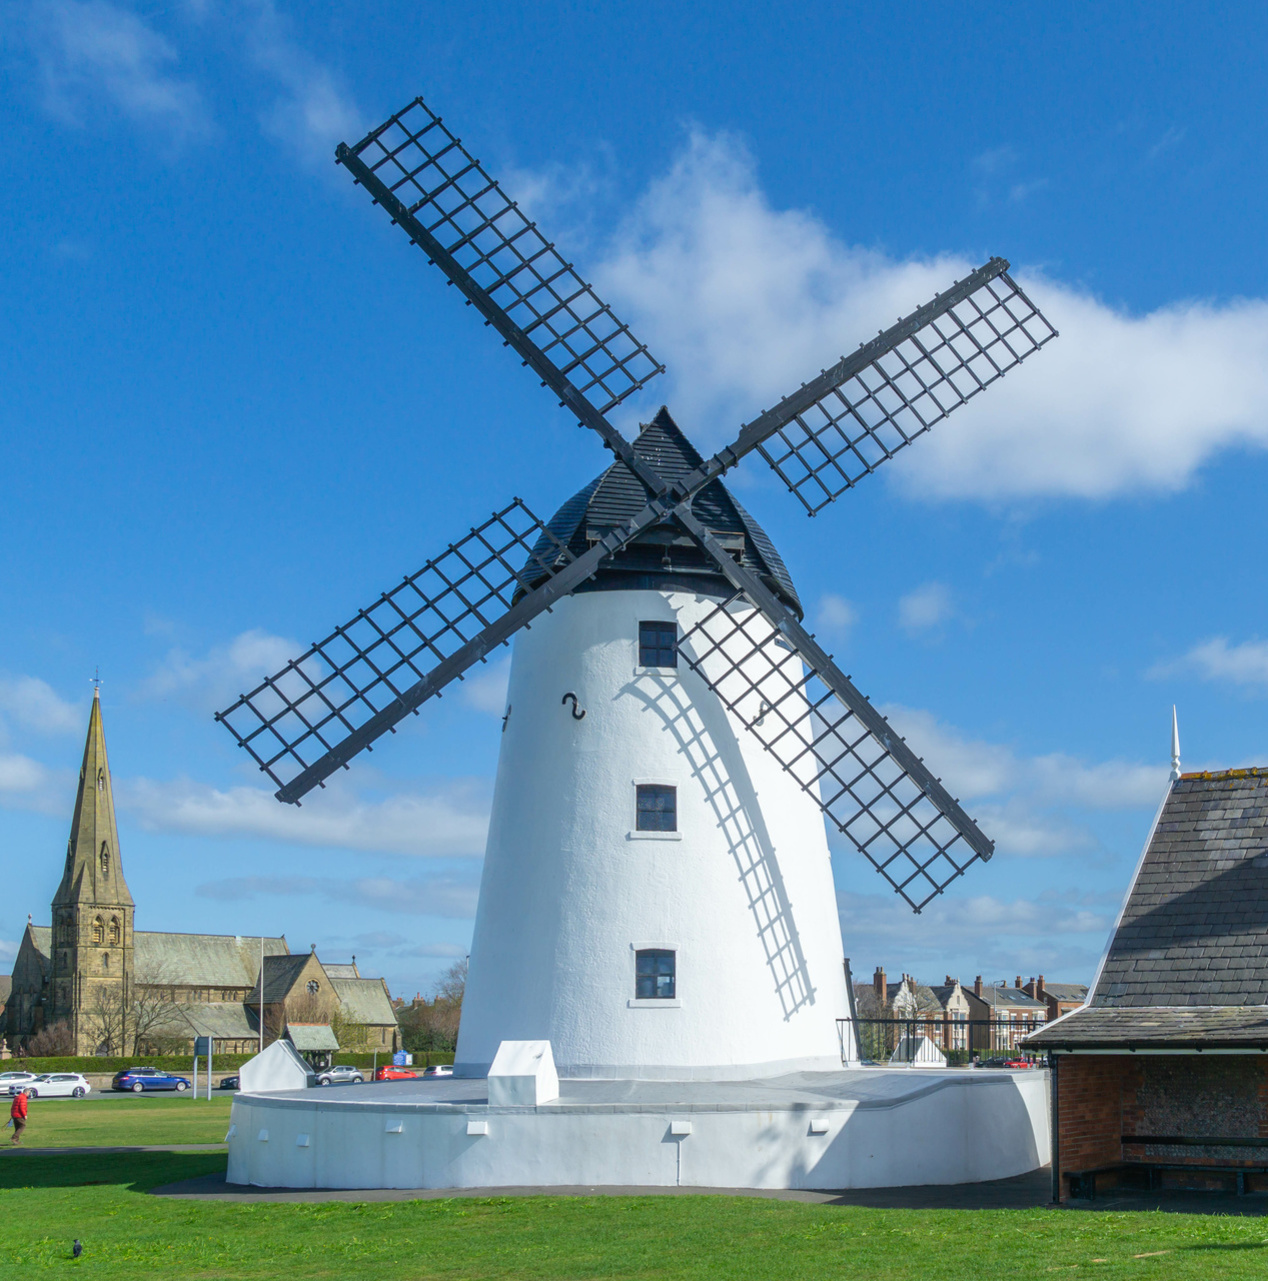 Lytham Windmill, located on Lytham sea front, near our Solicitors in Lytham's office at The Old Bakery, Green Street, Lytham, FY8 5LG.  Click the link to visit our Solicitors in Lytham's page.